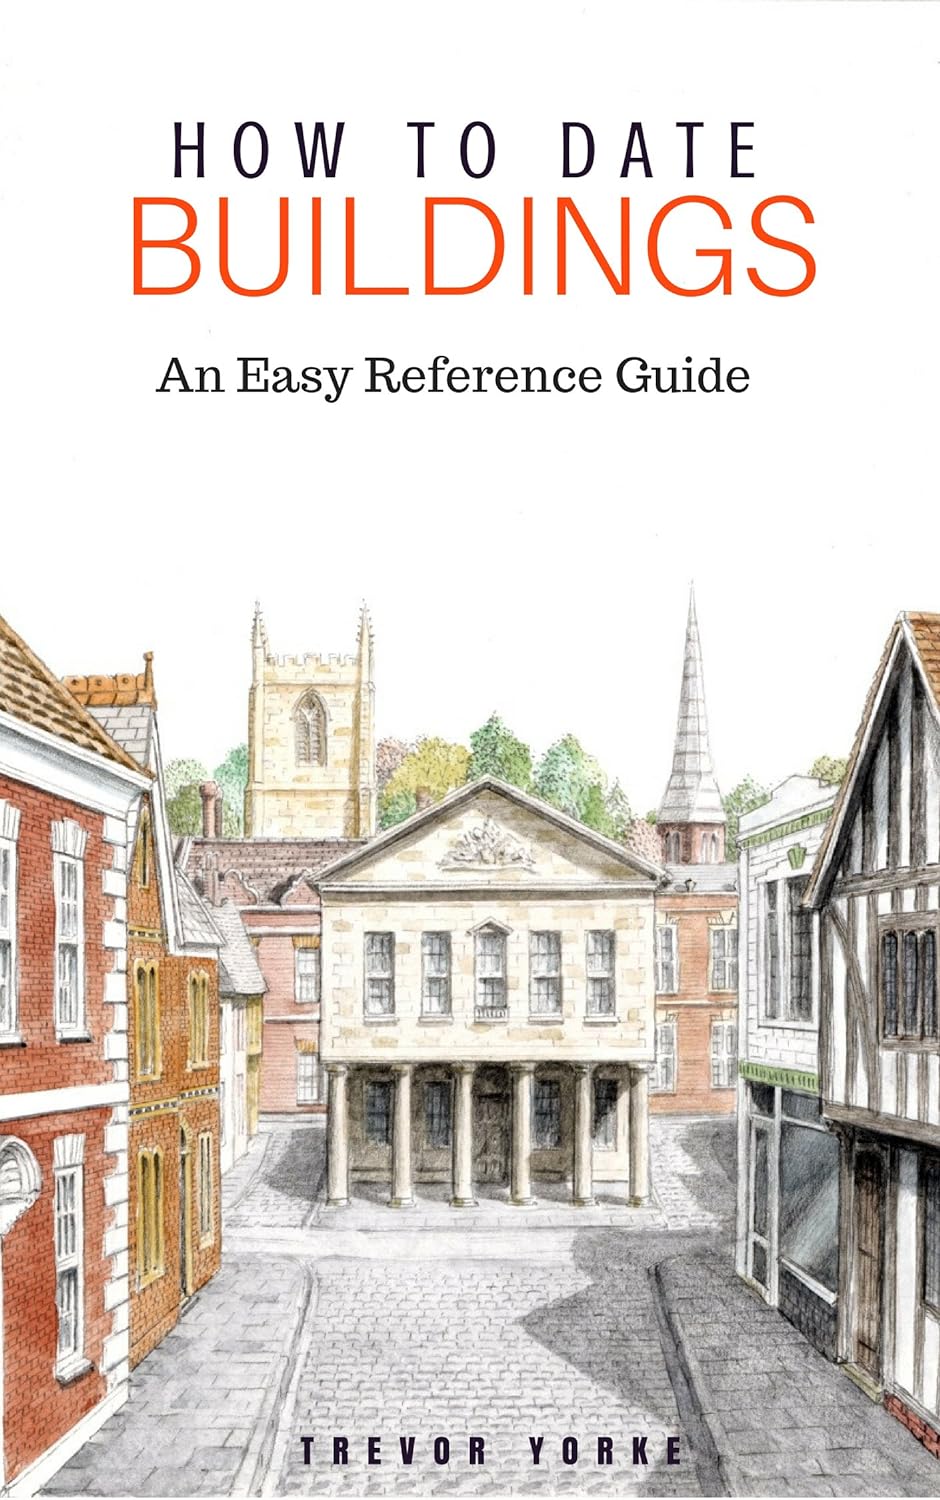 How To Date Buildings: An Easy Reference Guide Paperback – June 5, 2017 by Trevor Yorke (Author)